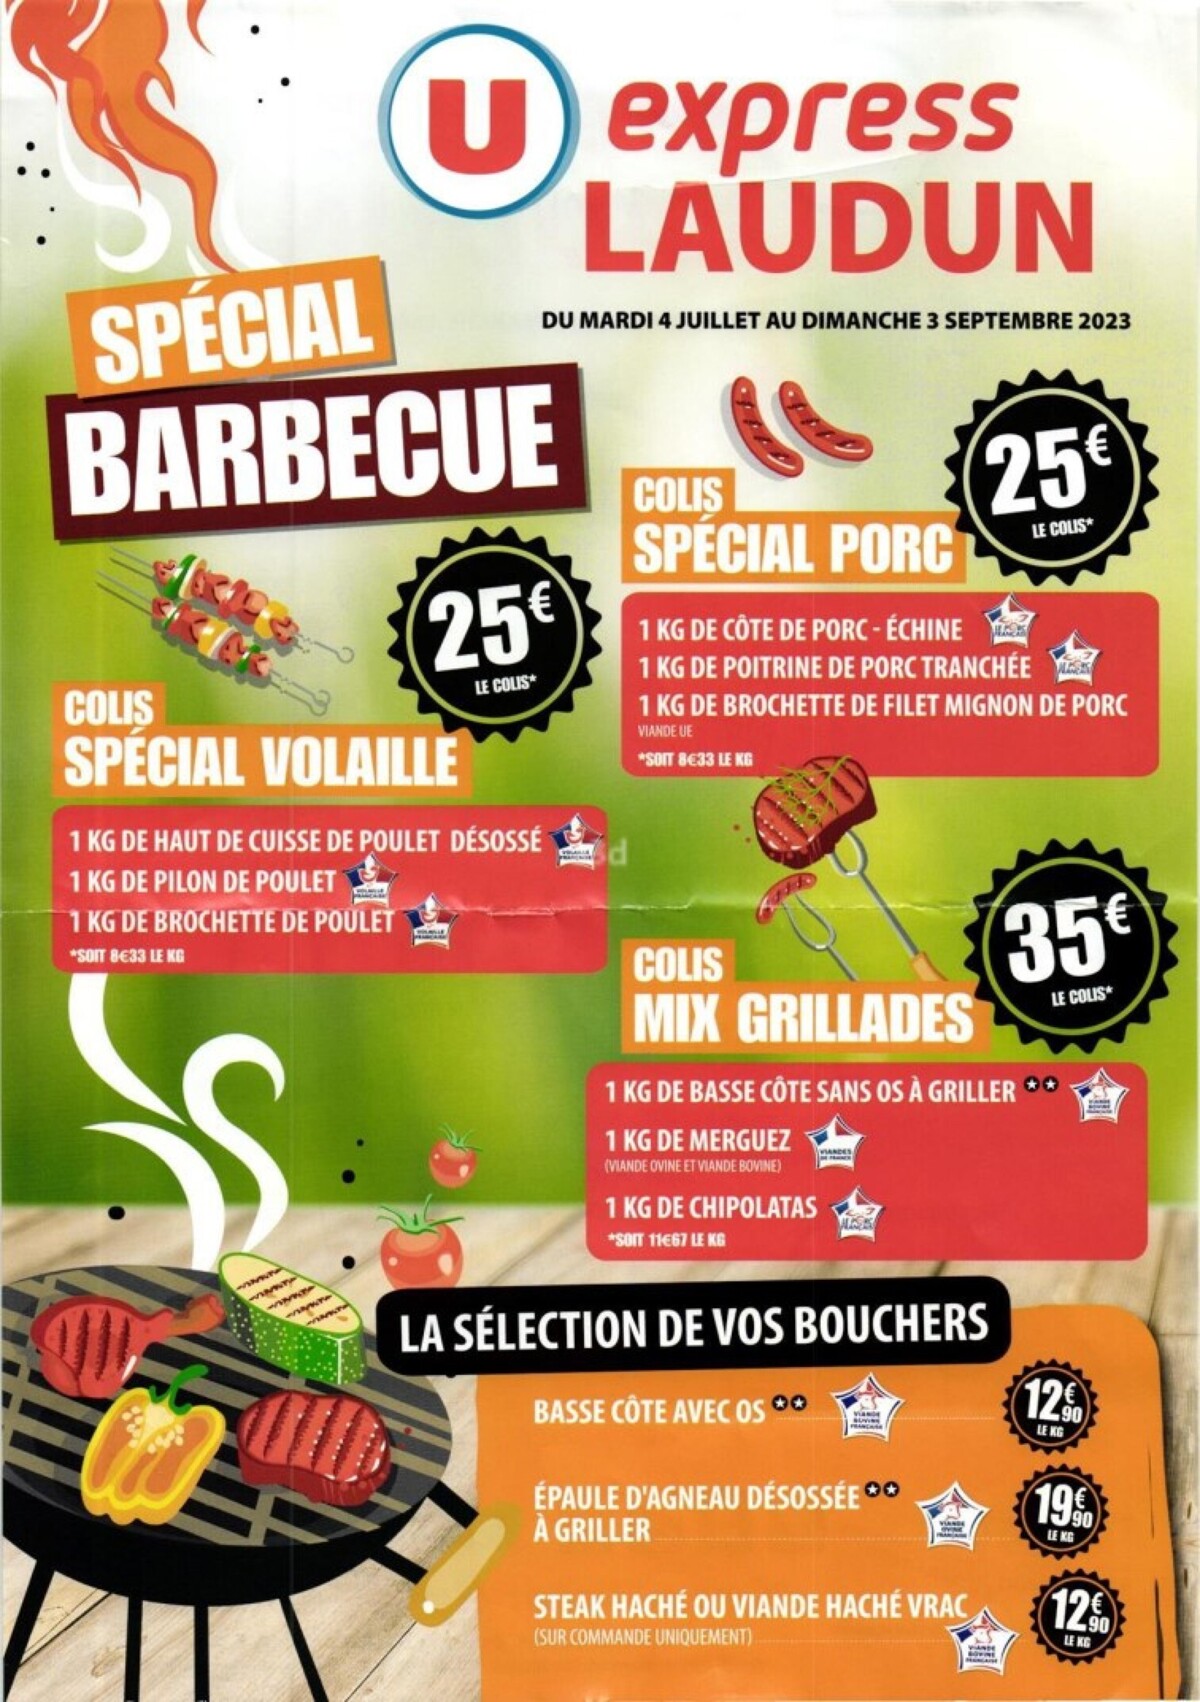 Catalogue Special barbecue, page 00001